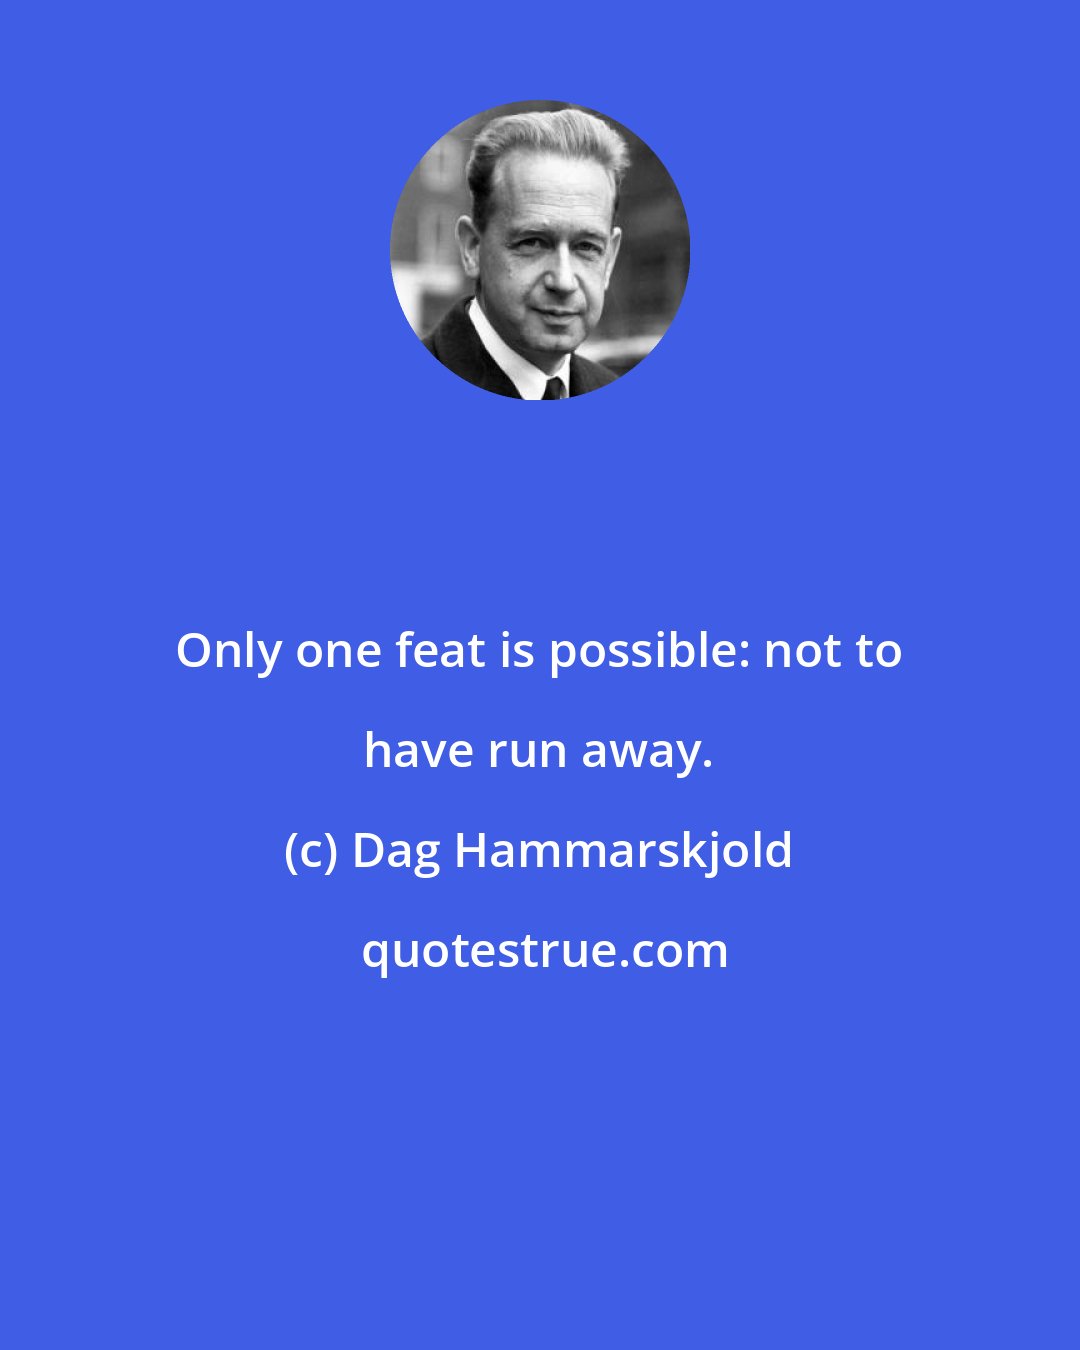 Dag Hammarskjold: Only one feat is possible: not to have run away.